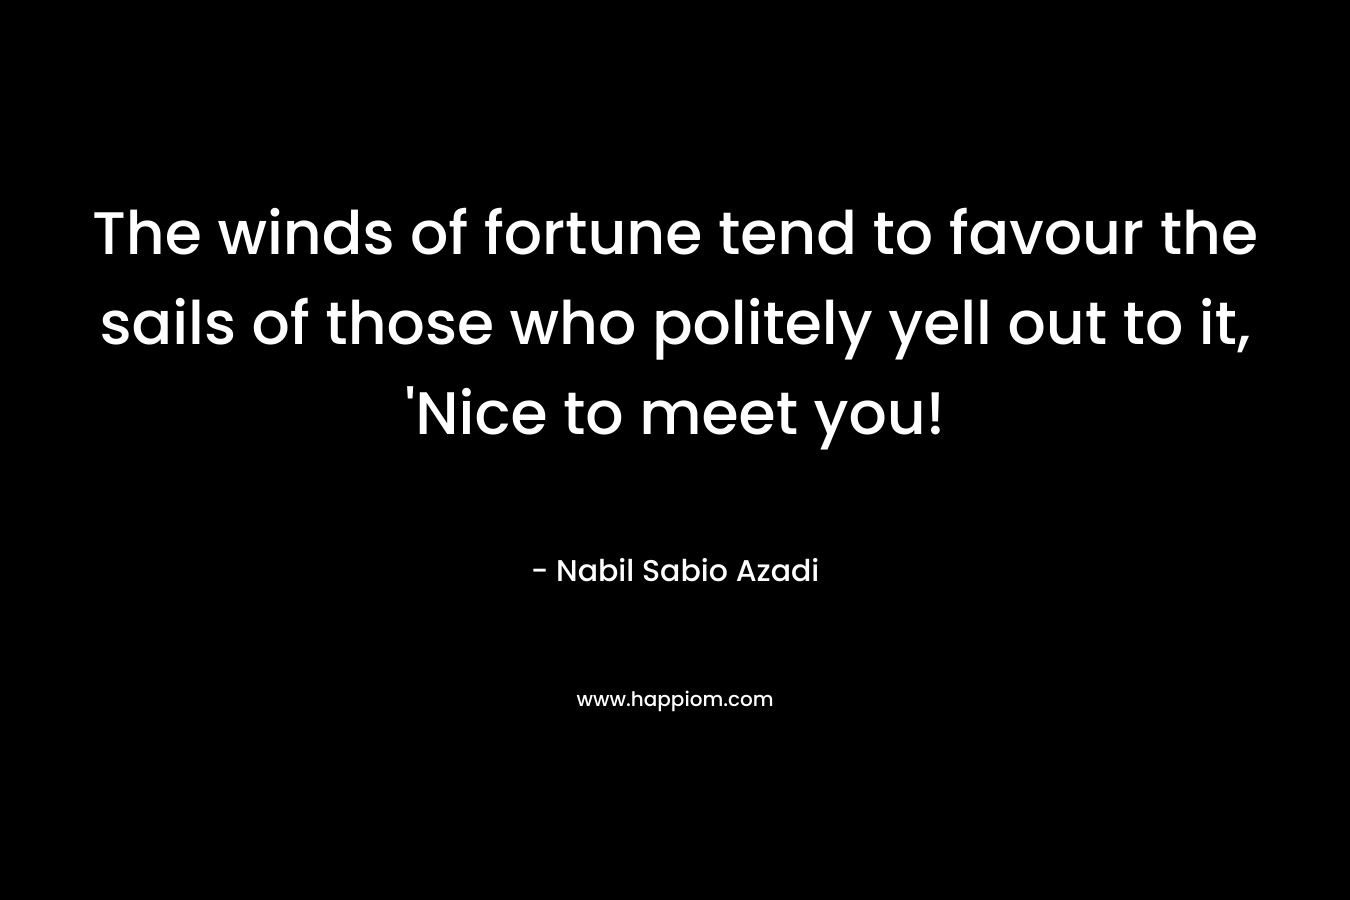 The winds of fortune tend to favour the sails of those who politely yell out to it, ‘Nice to meet you! – Nabil Sabio Azadi